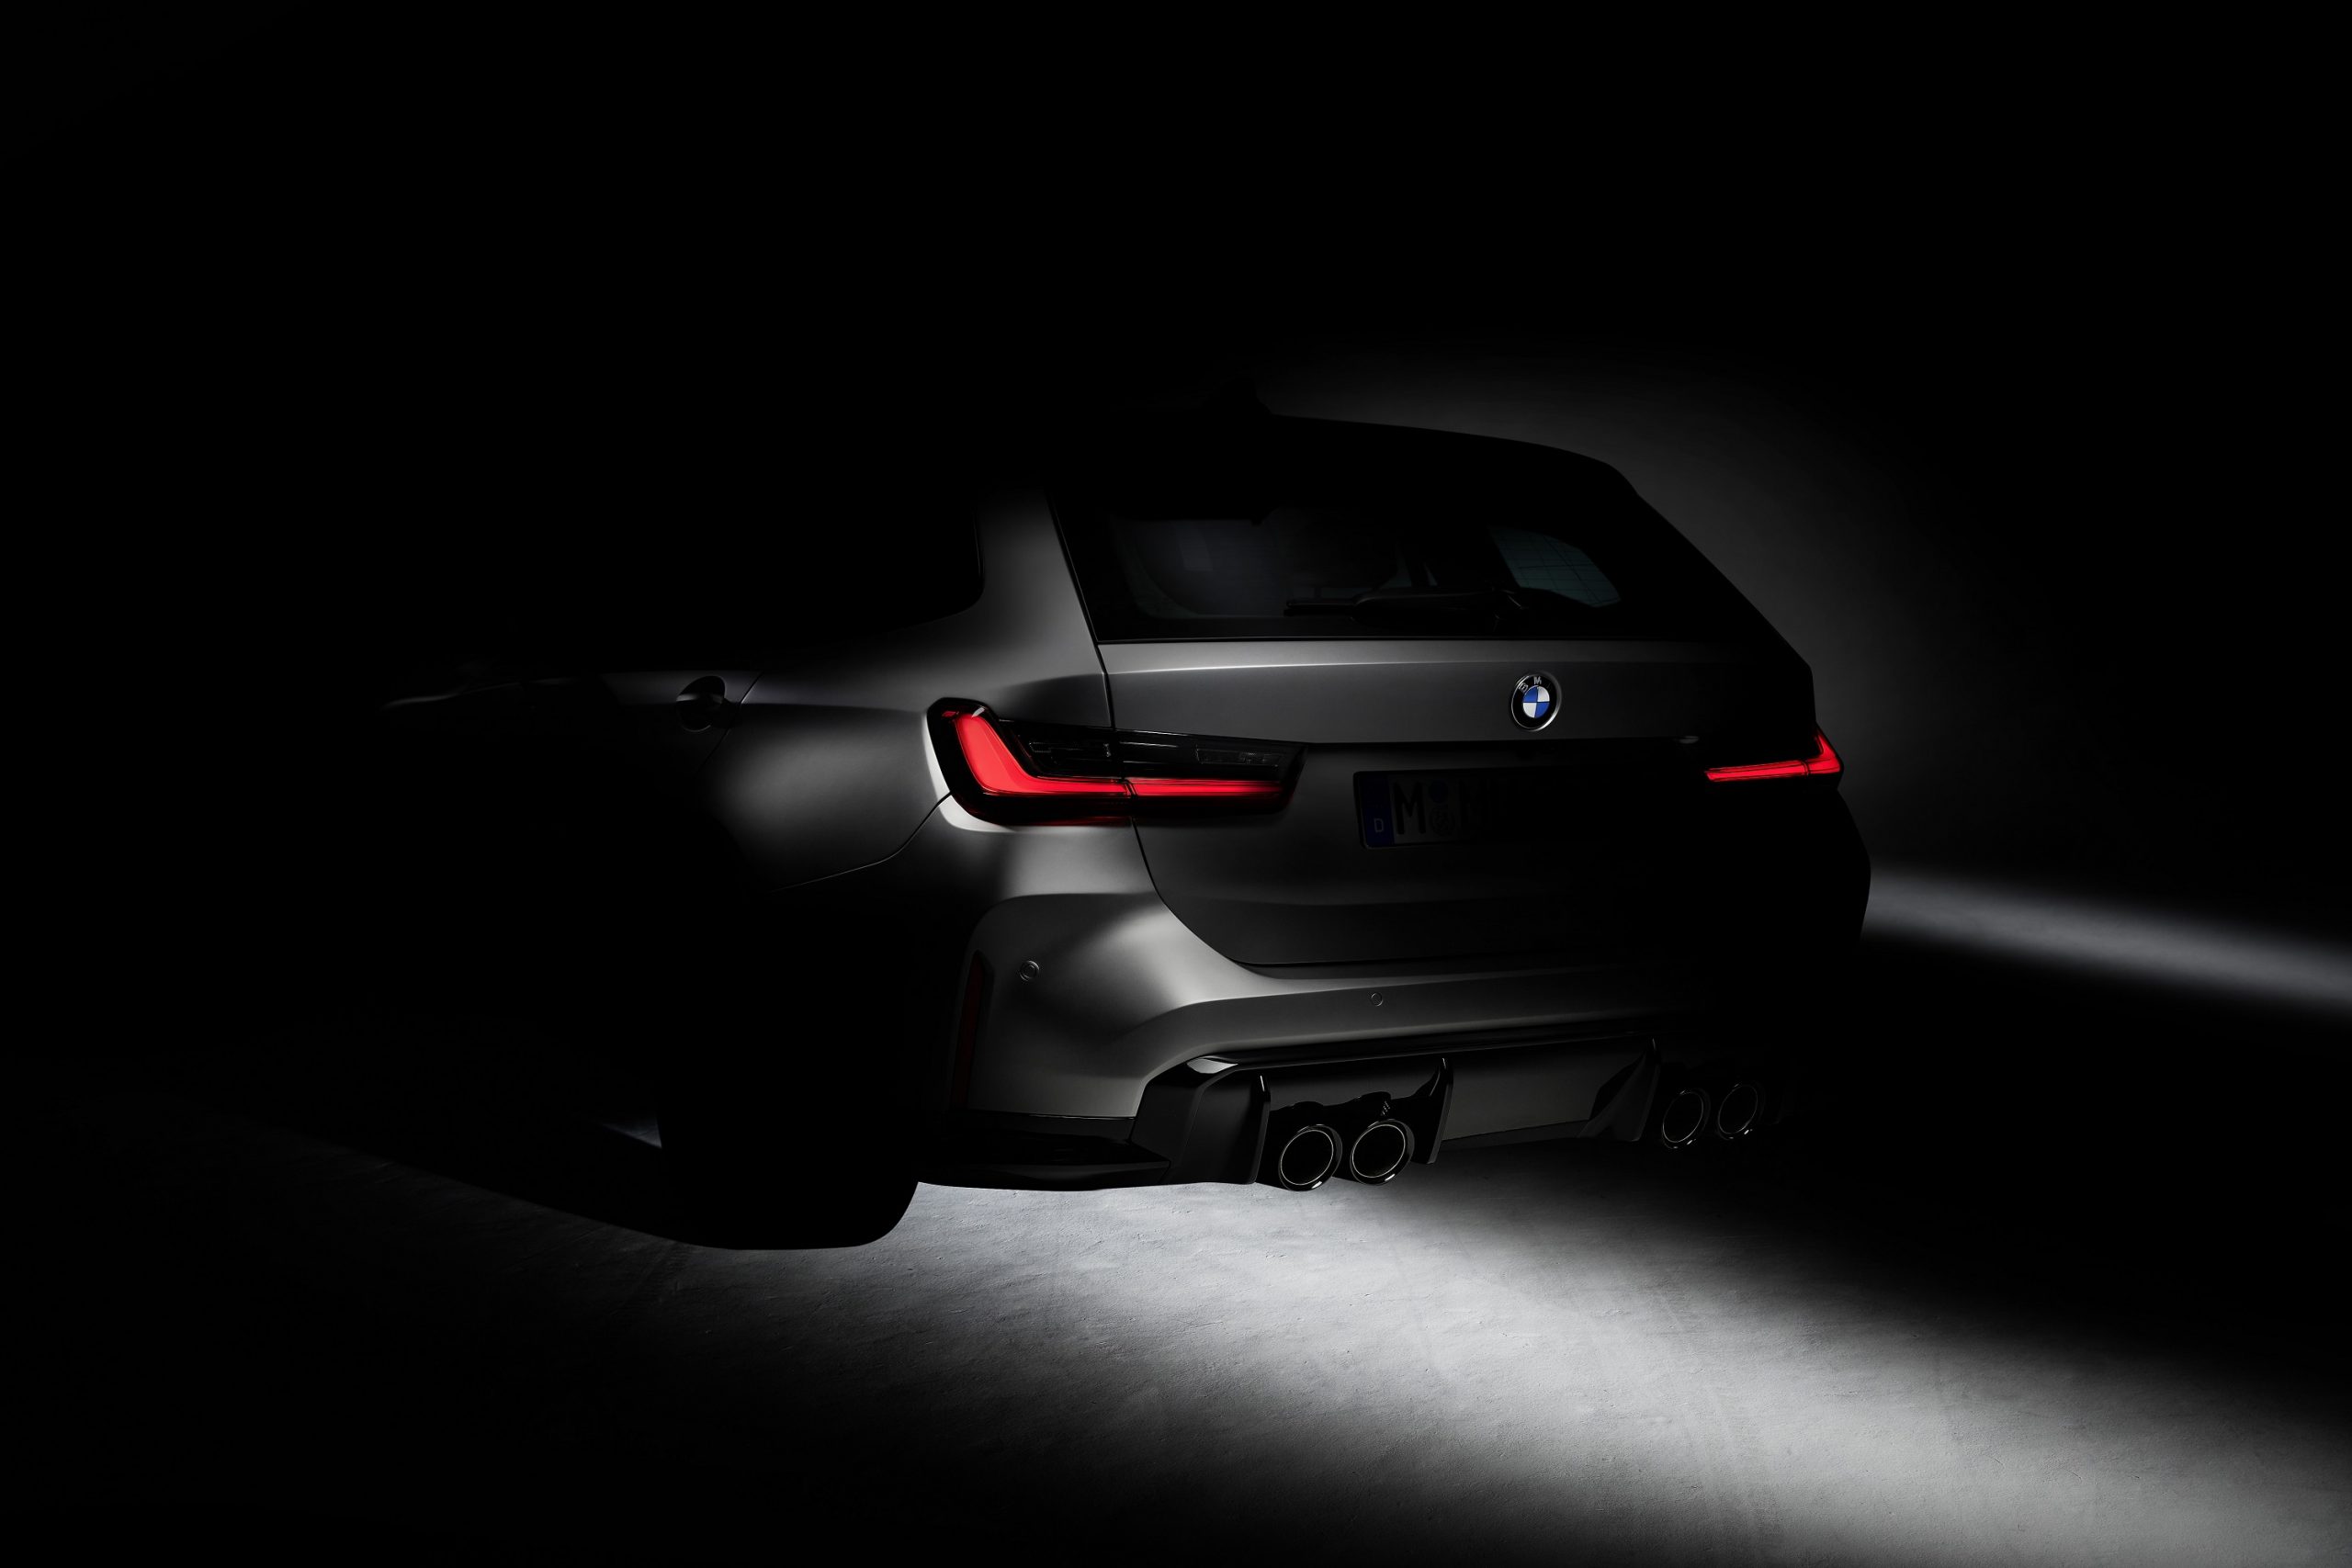 The silhouette of the 2022 BMW M3 touring shot from the rear 3/4 angle